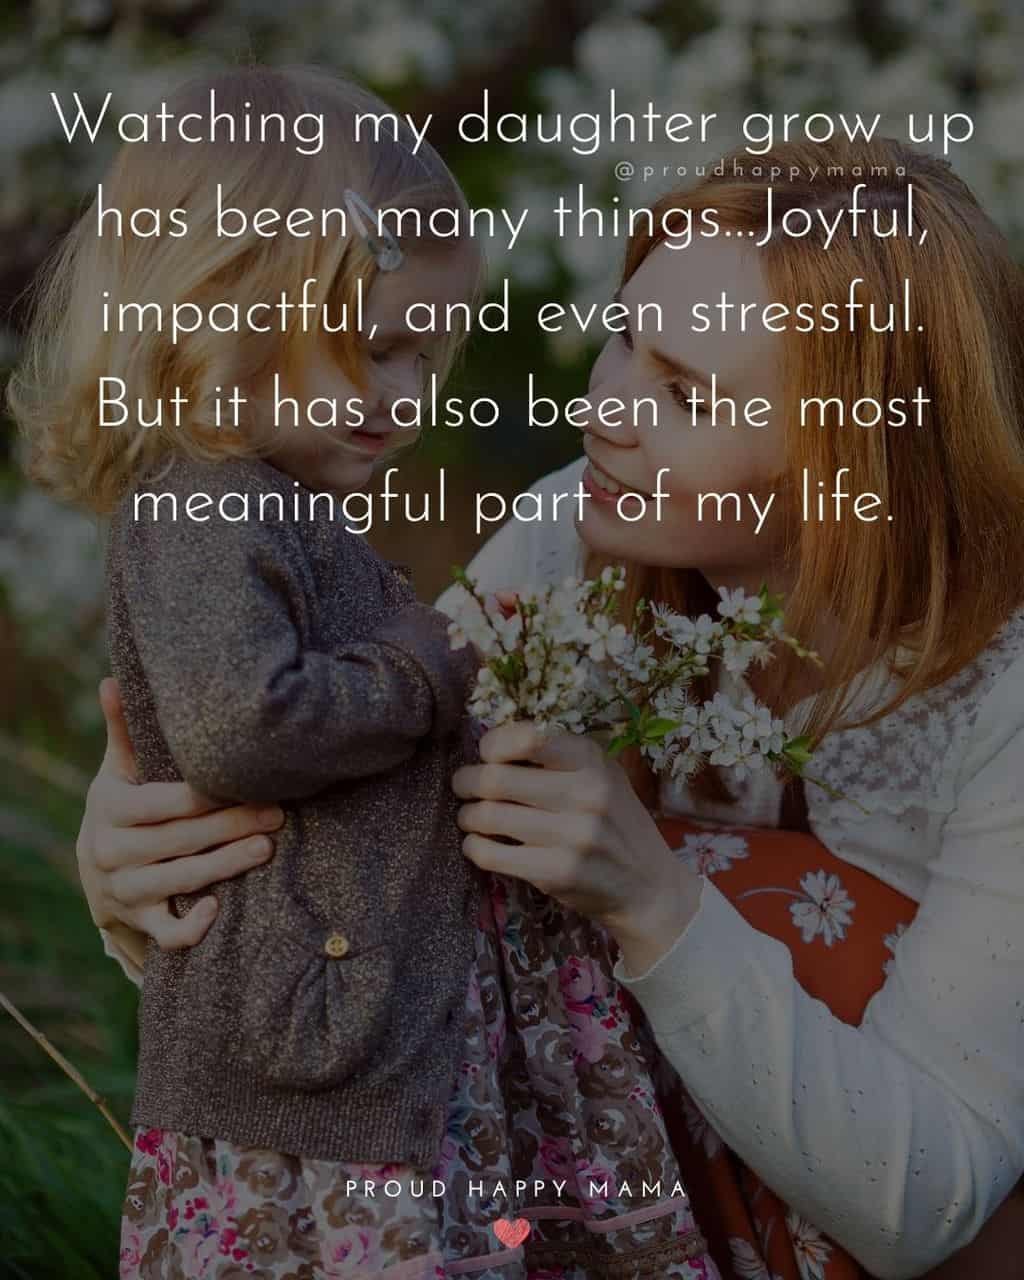 lovely daughter quotes - ‘Watching my daughter grow up has been many things…Joyful, impactful, and even stressful. But it has also been the